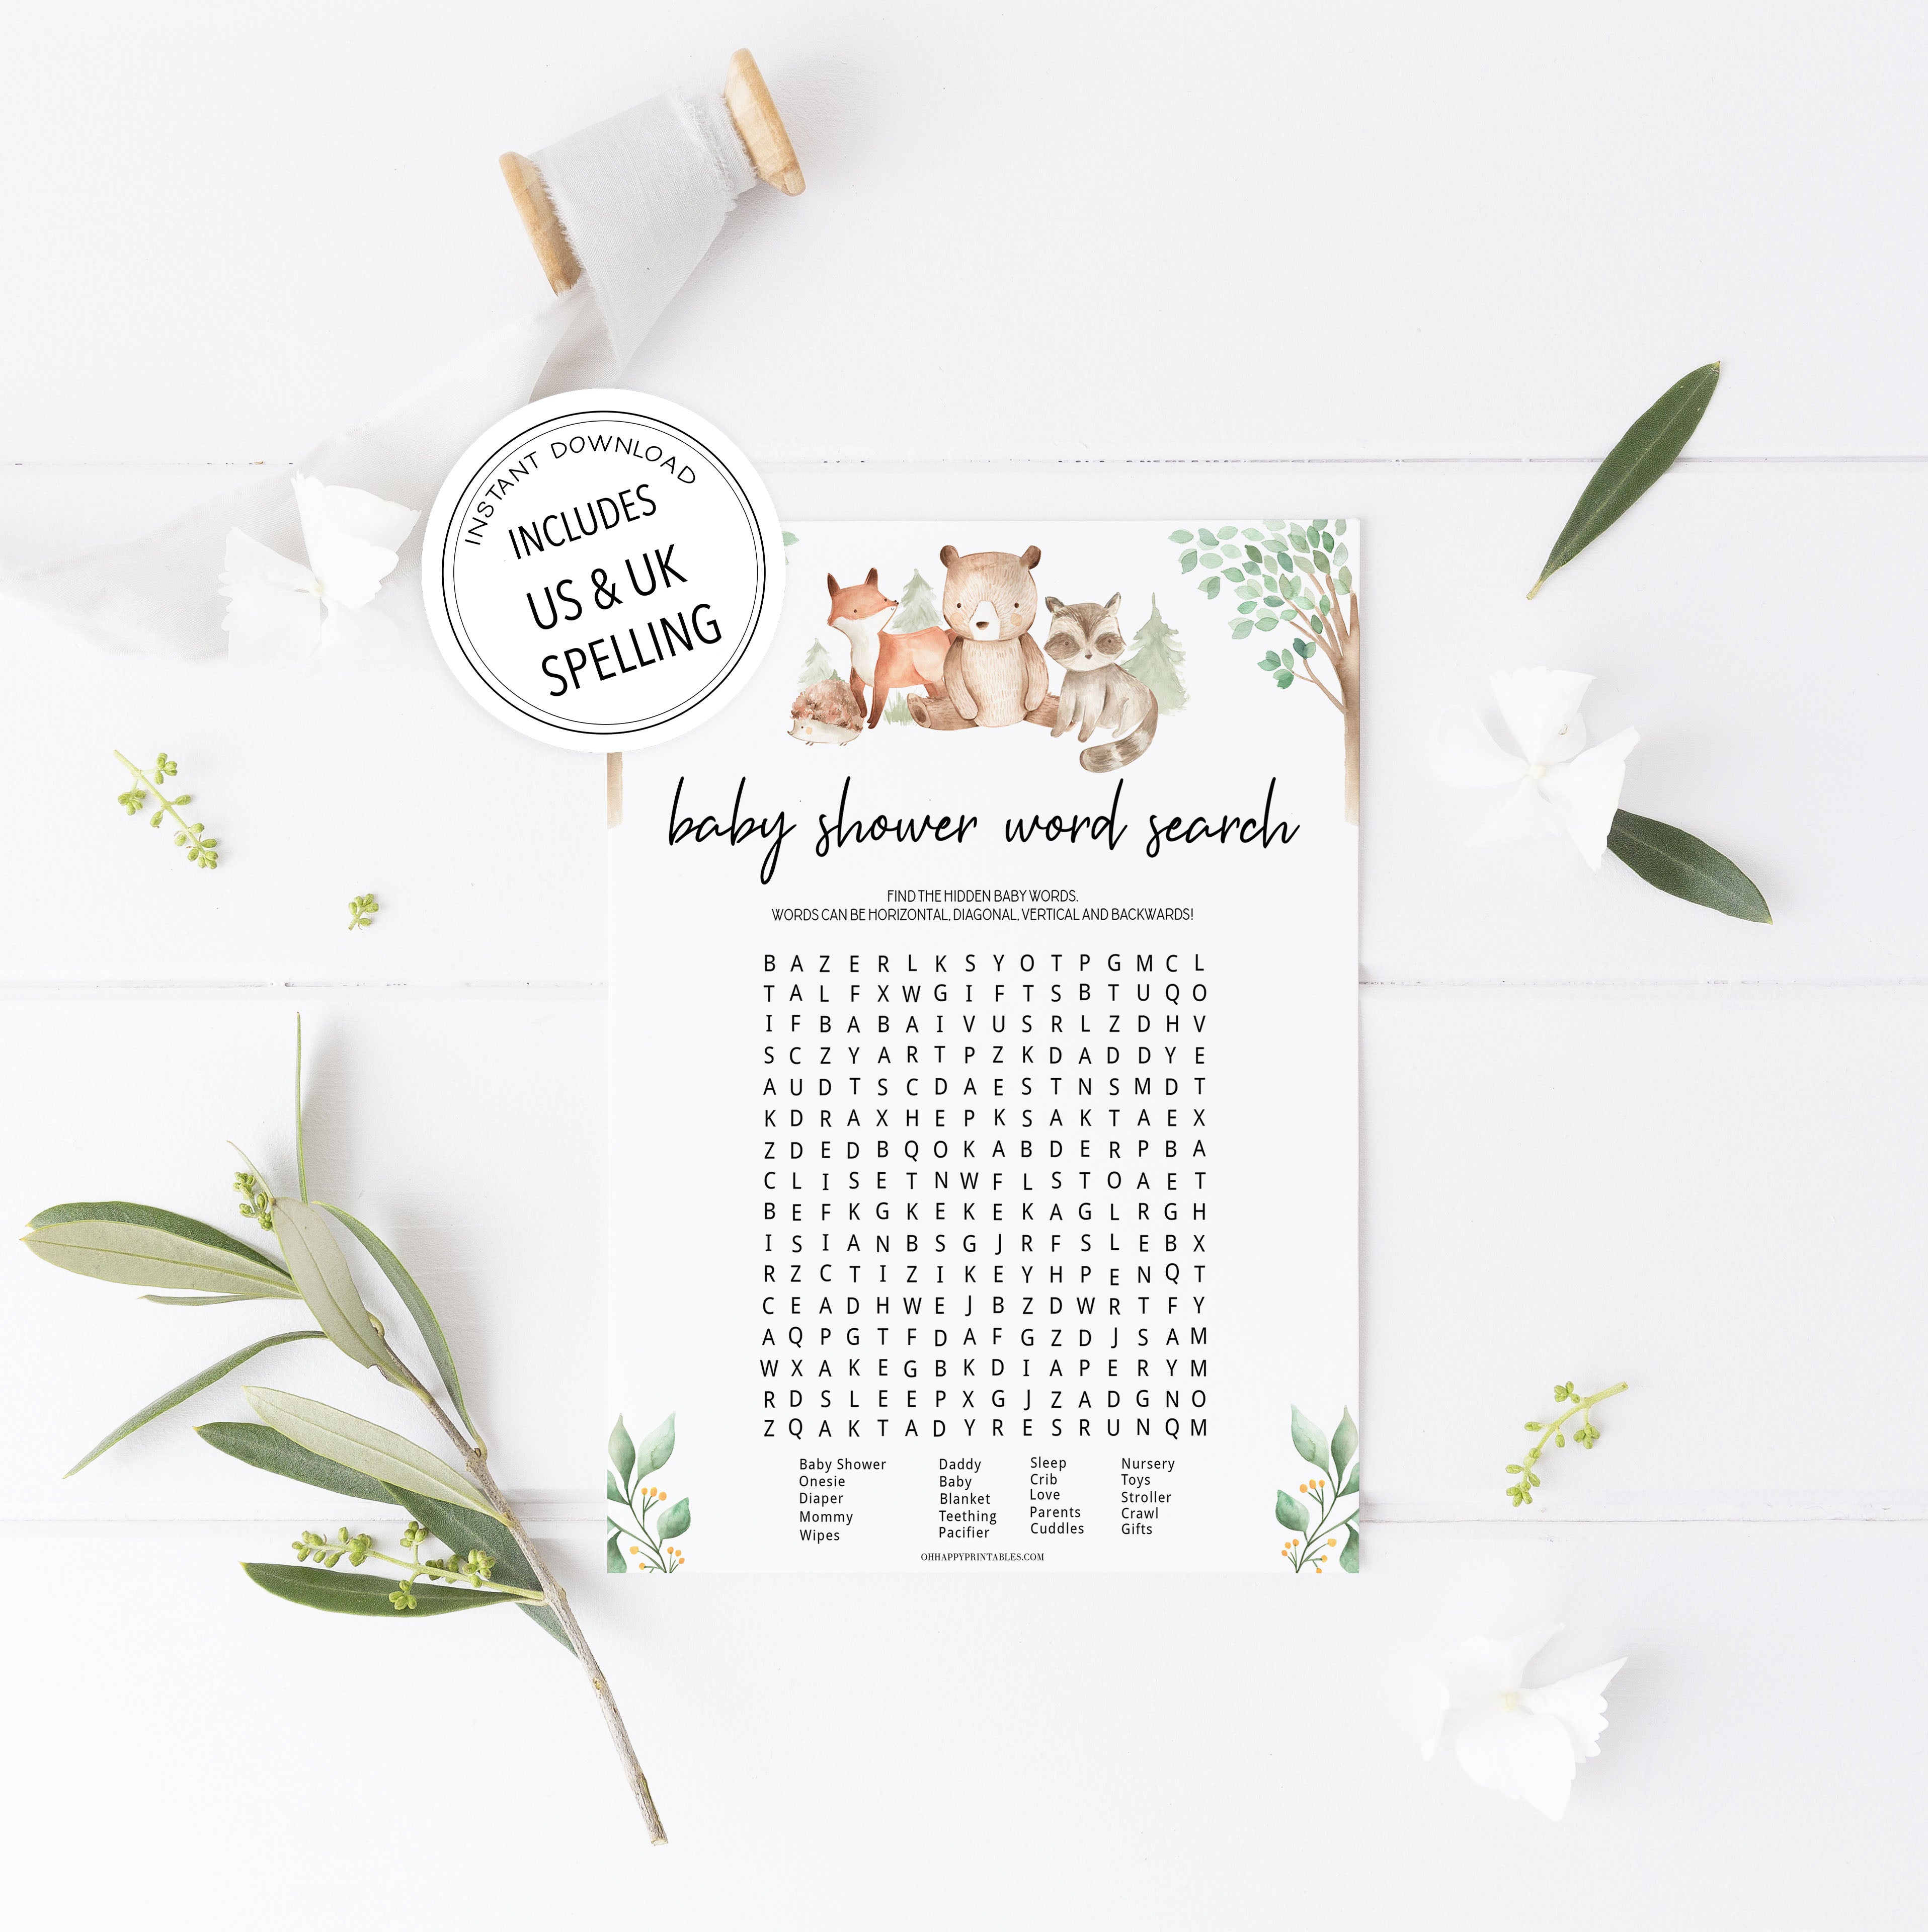 baby shower word search game, Printable baby shower games, woodland animals baby games, baby shower games, fun baby shower ideas, top baby shower ideas, woodland baby shower, baby shower games, fun woodland animals baby shower ideas